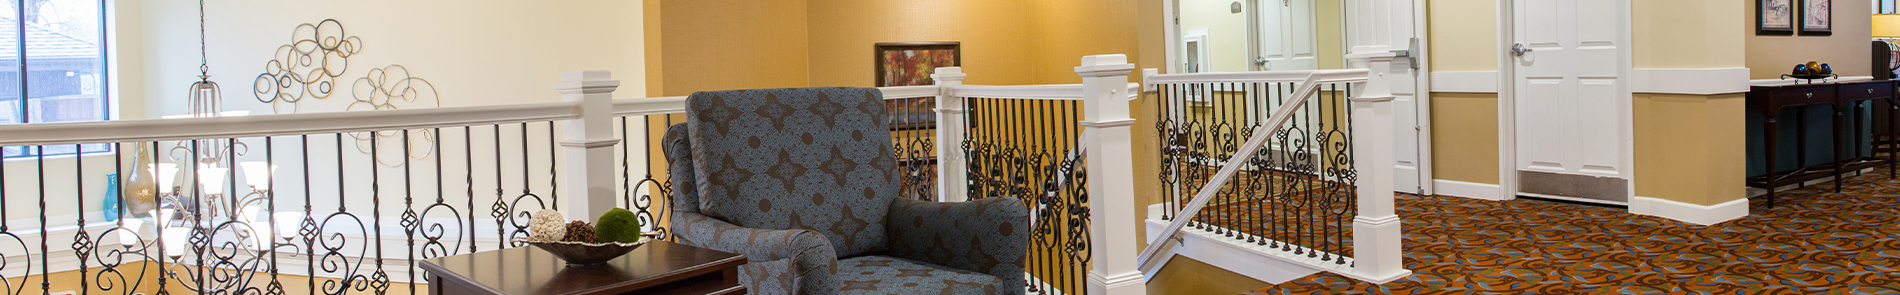 Schedule a Tour of a Senior Home in MN